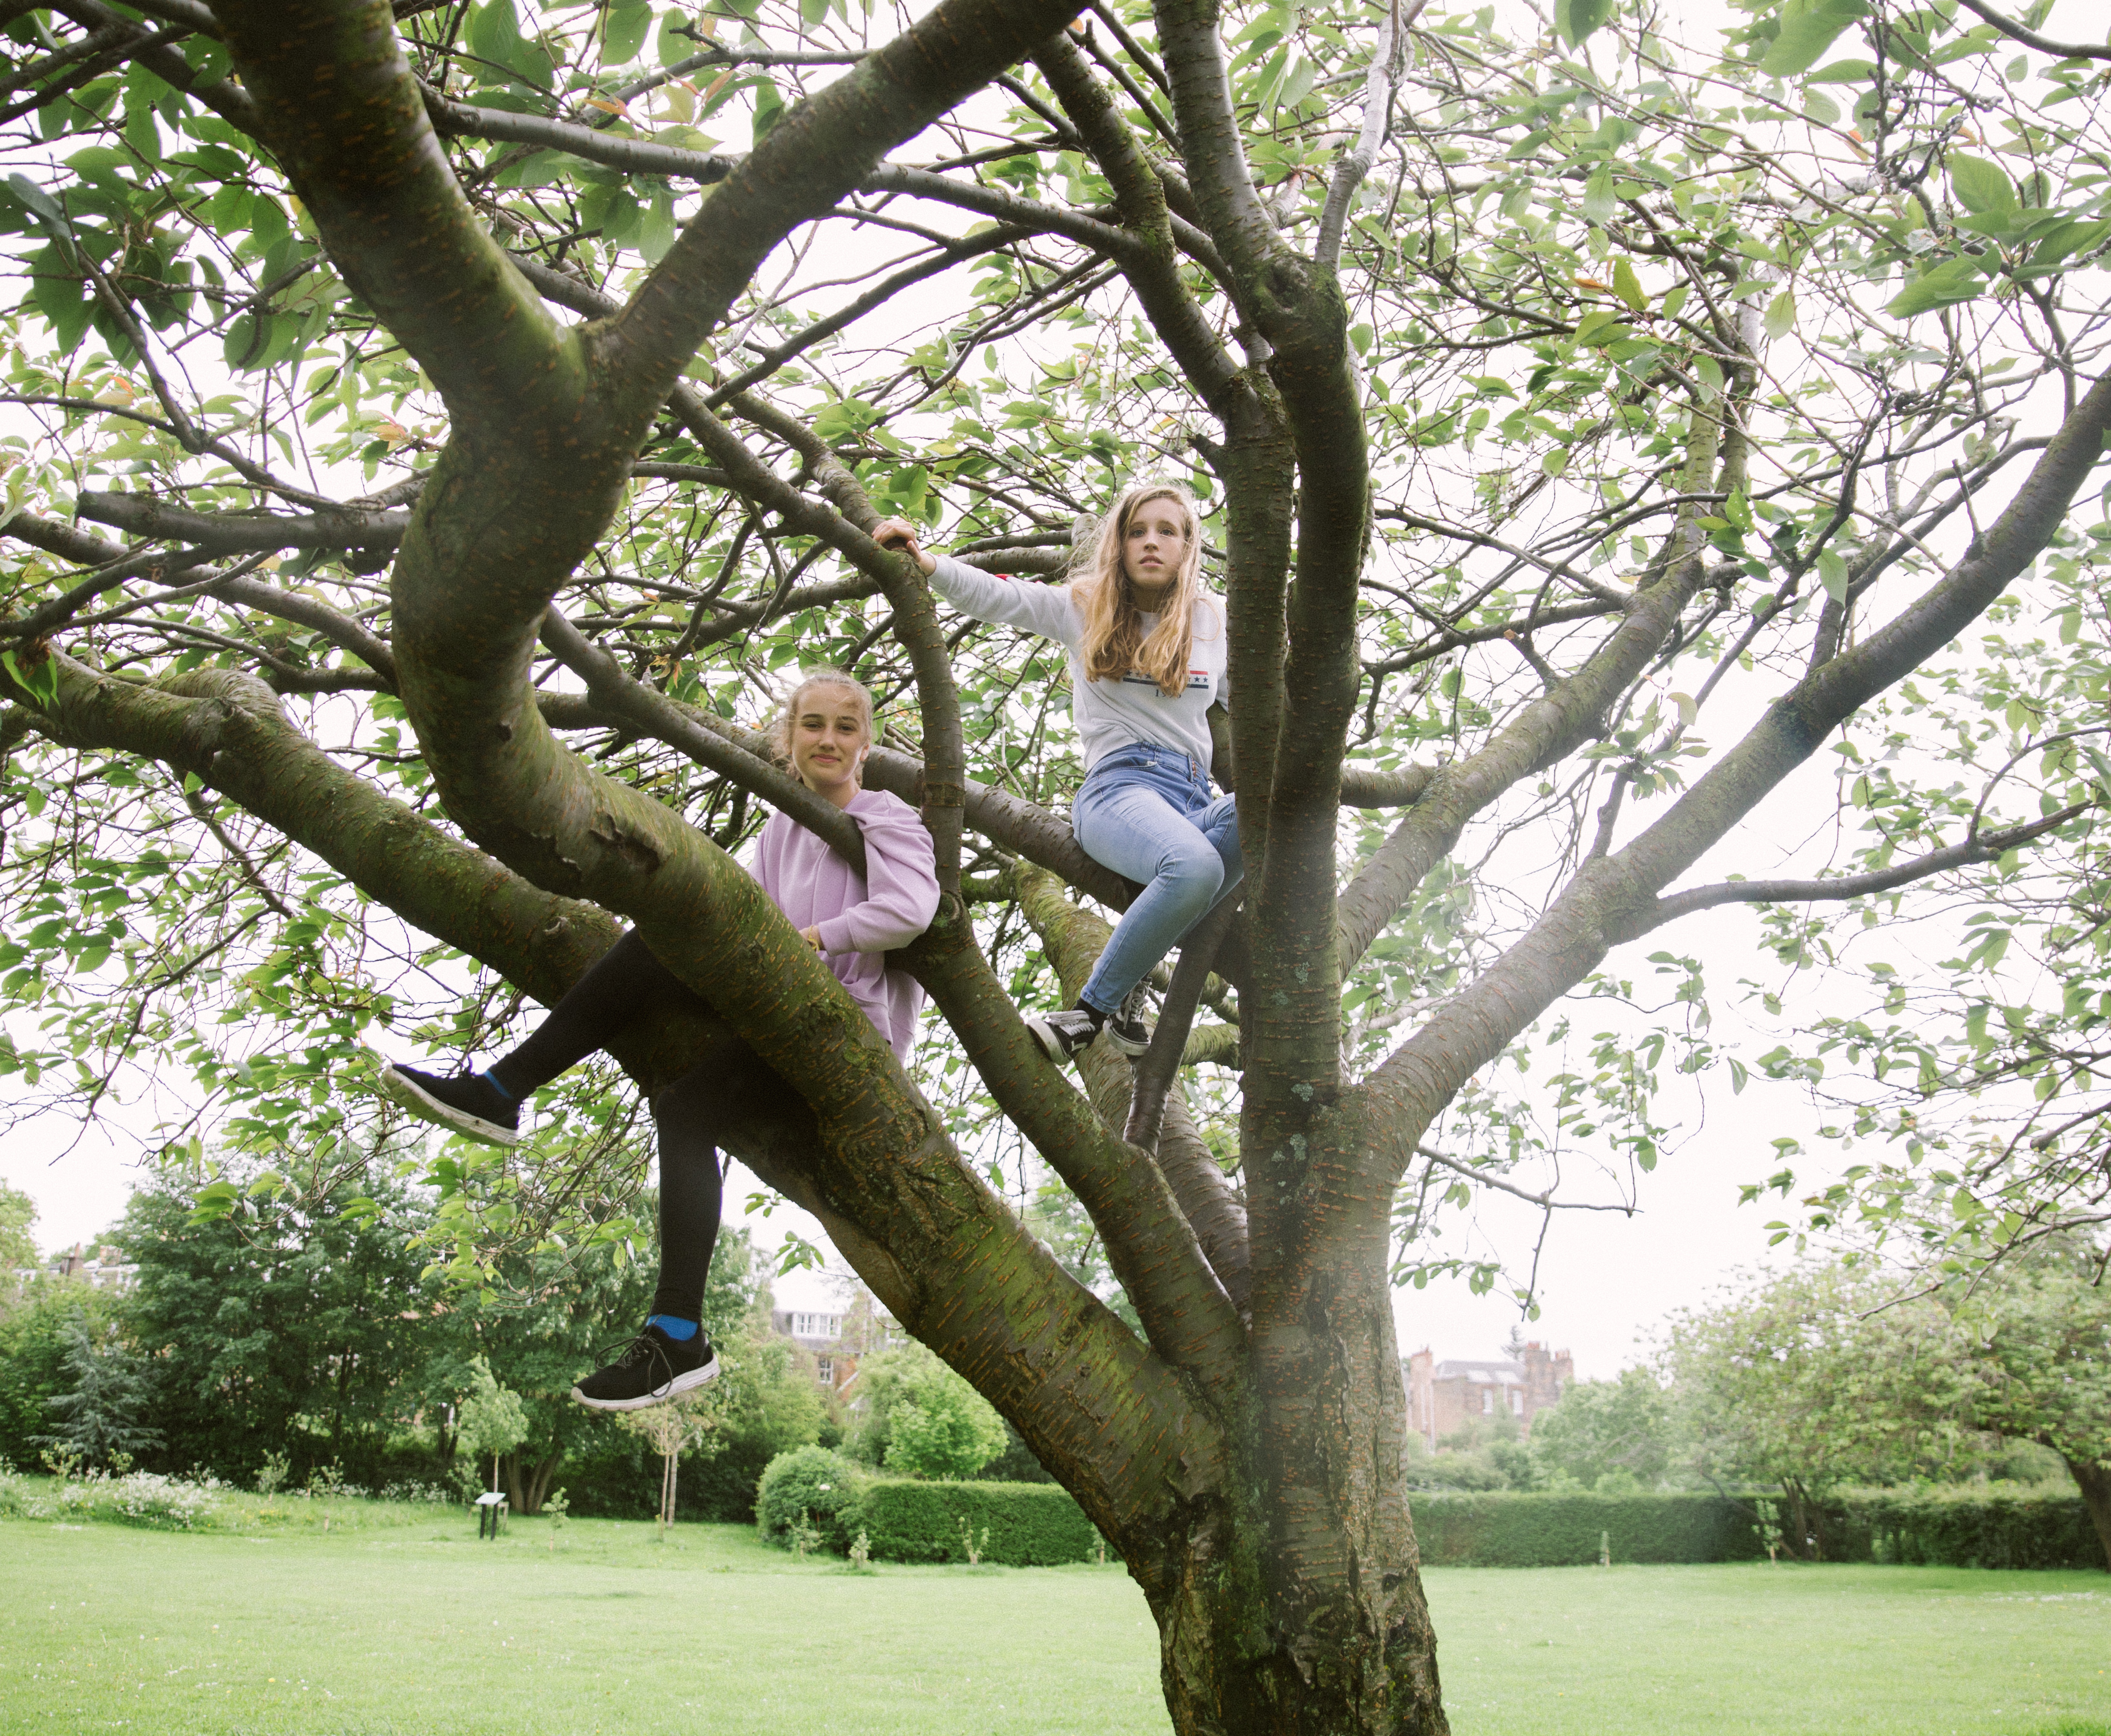 A photo of some young people sitting in a large tree on its branches. The tree has leaves and there is a grassy park in the background.